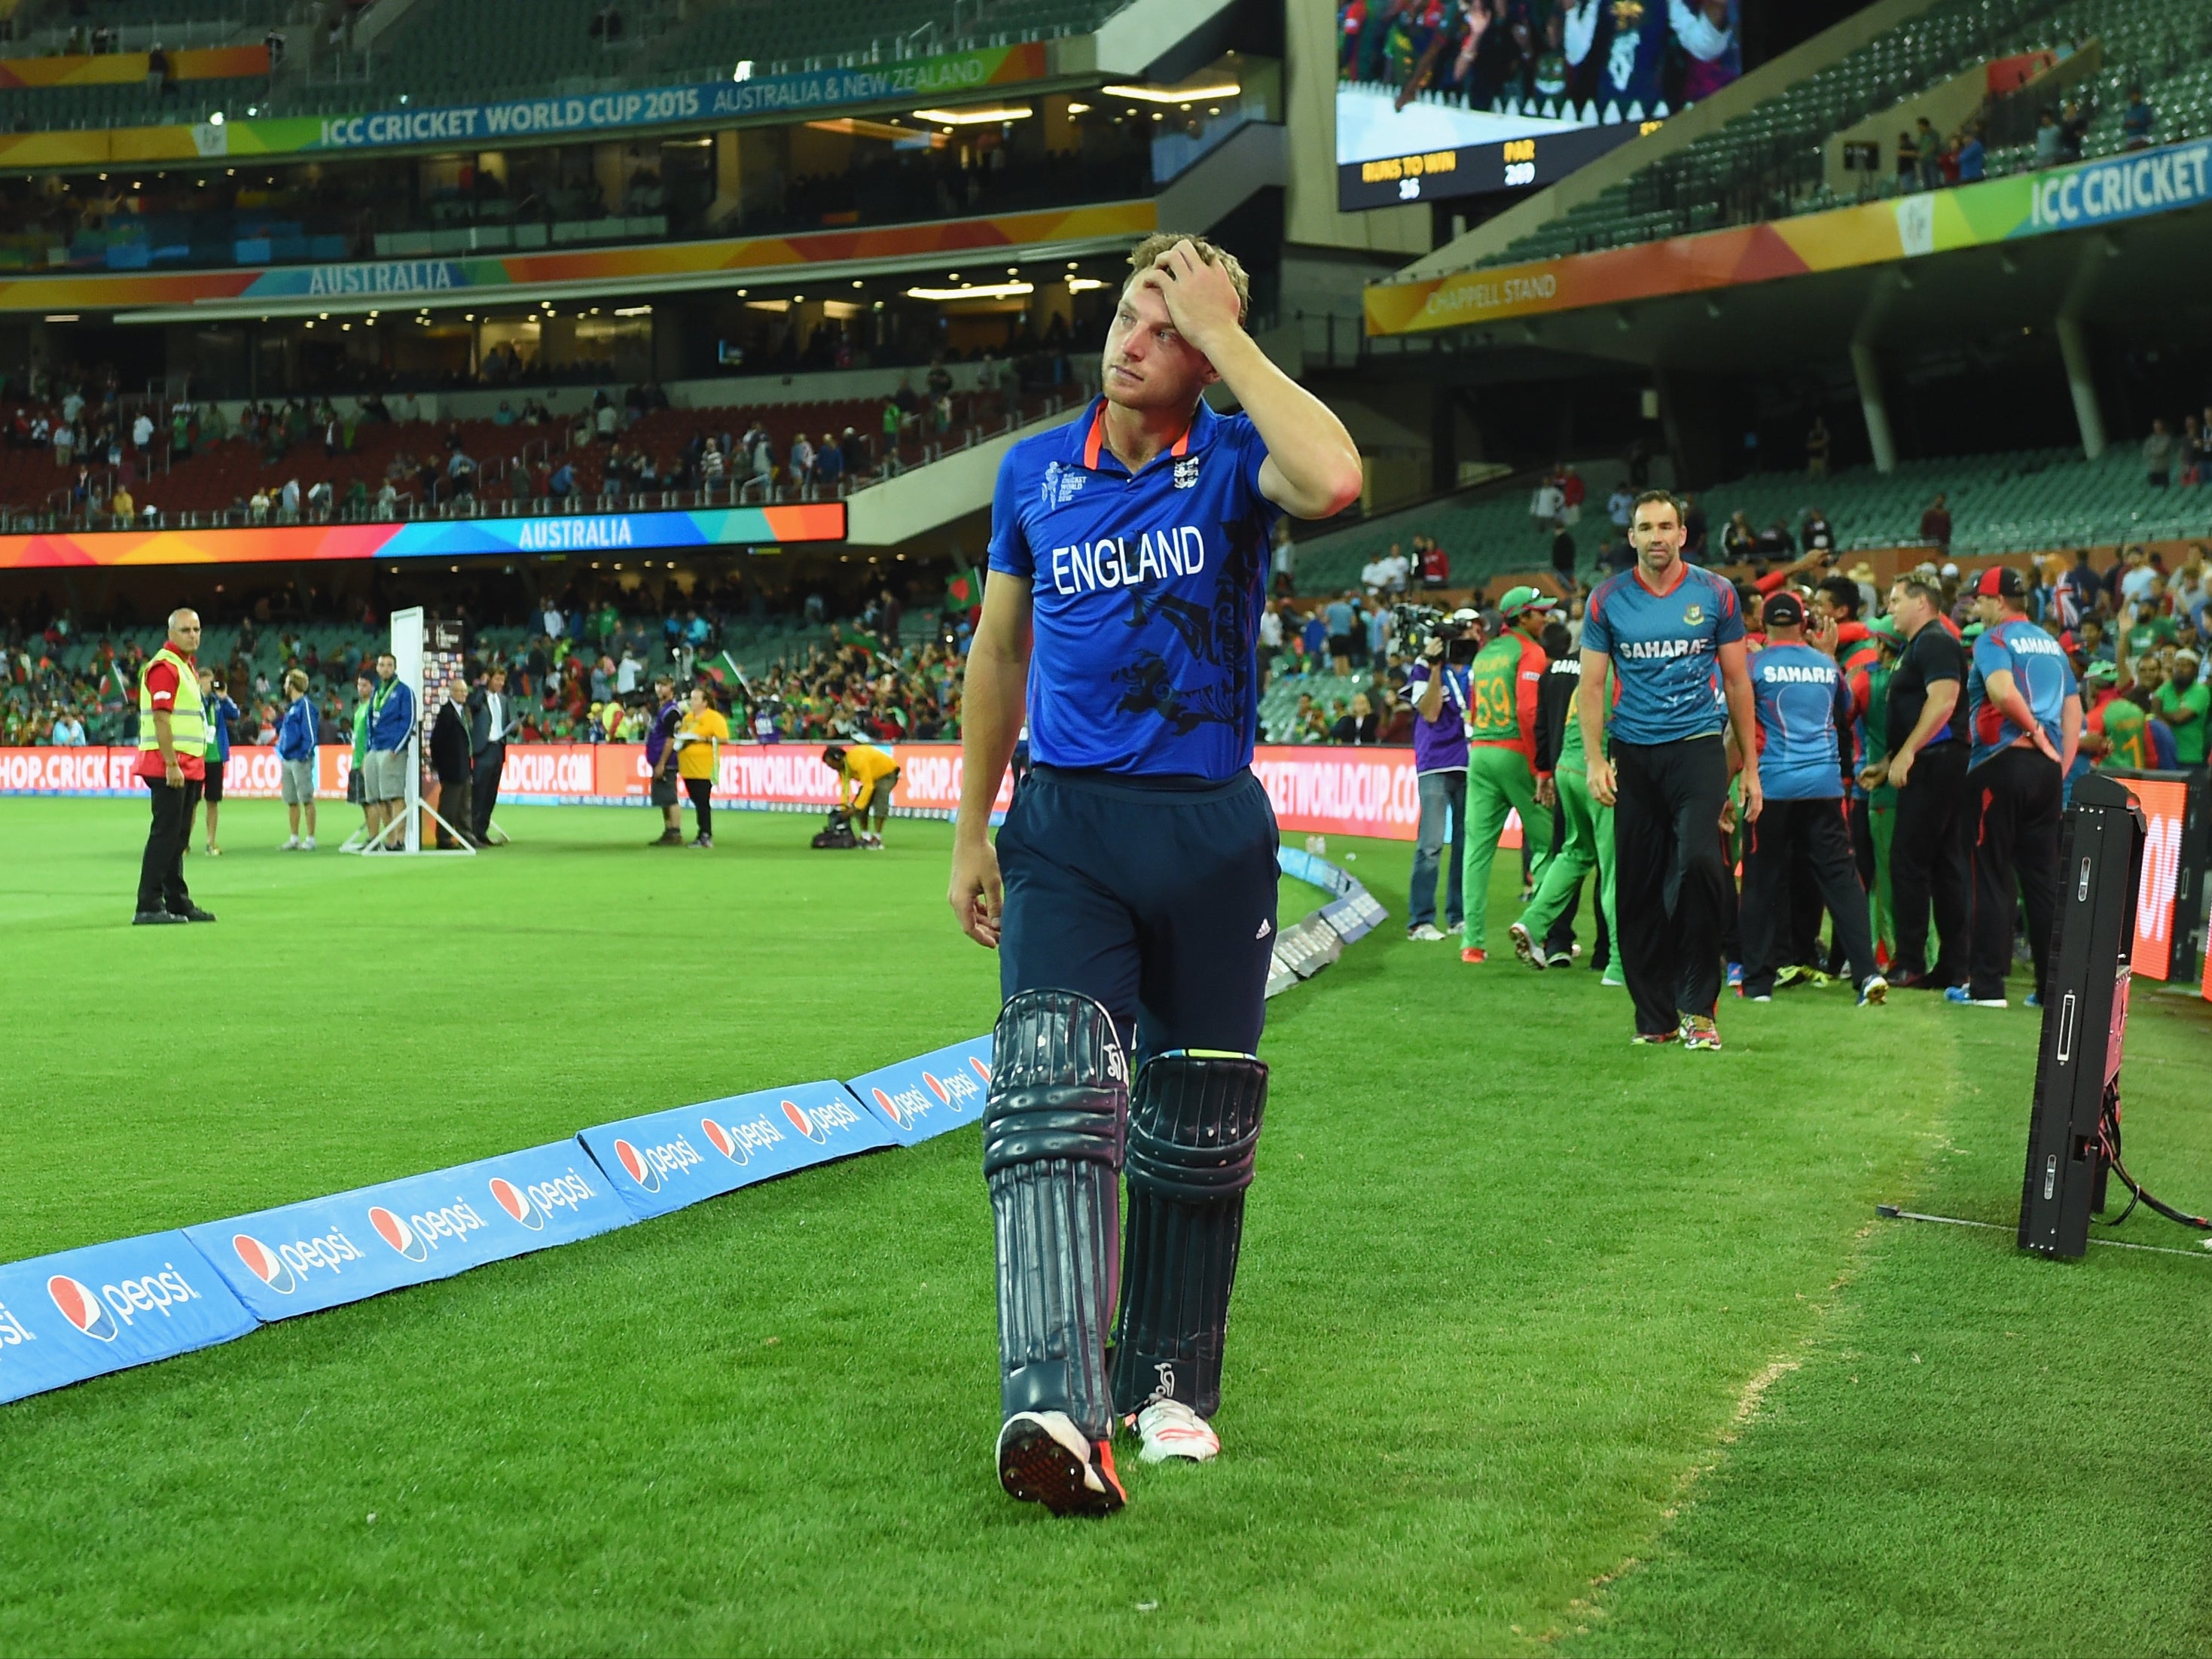 Buttler was part of the England team that lost to Bangladesh in Adelaide at the 2015 tournament